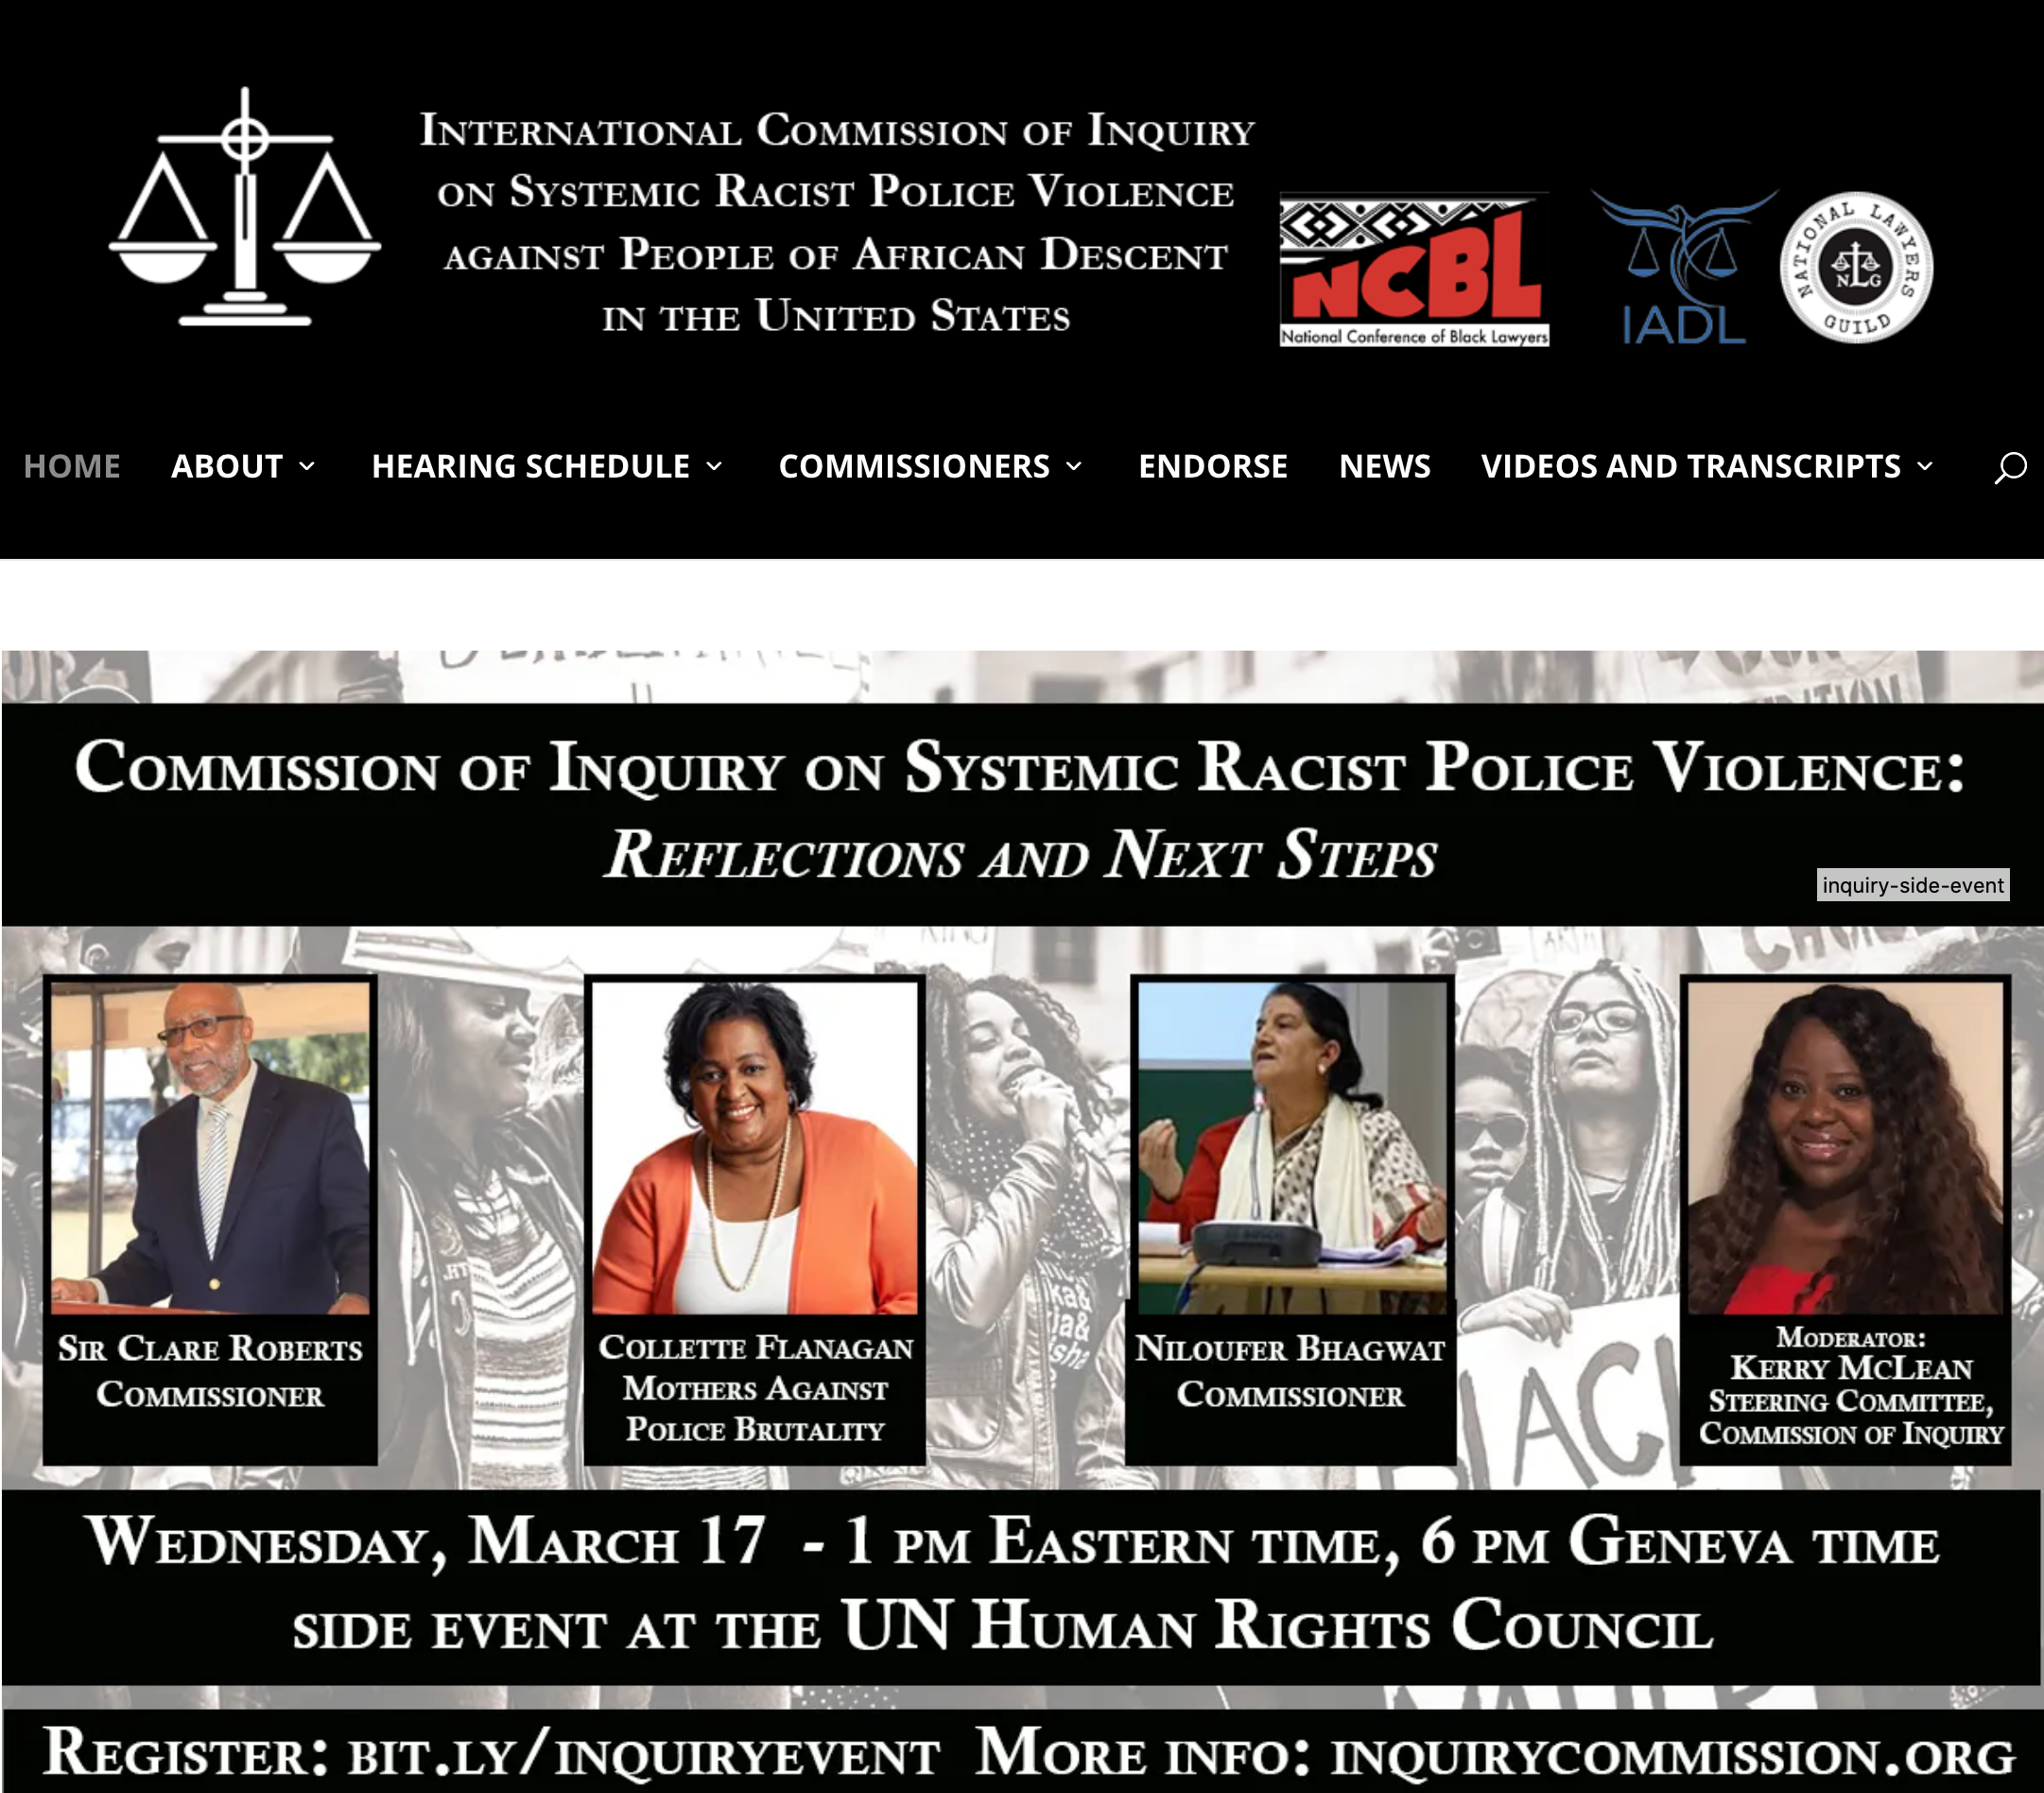 International Commission of Inquiry on Systemic Racist Police Violence against People of African Descent in the United States